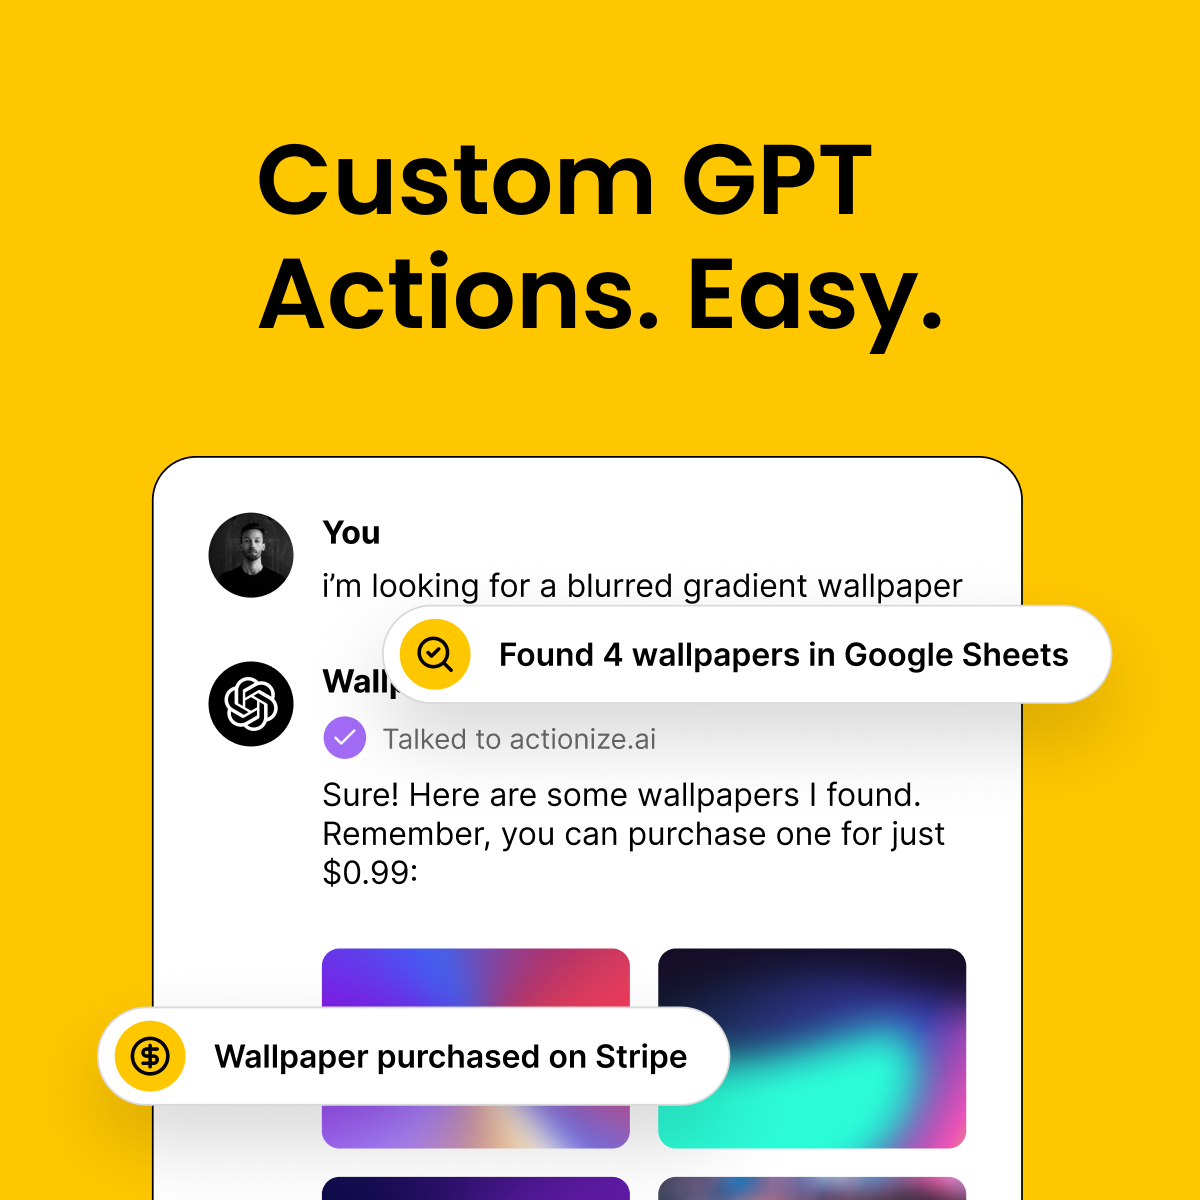 actionize-ai - Custom GPT actions, easy